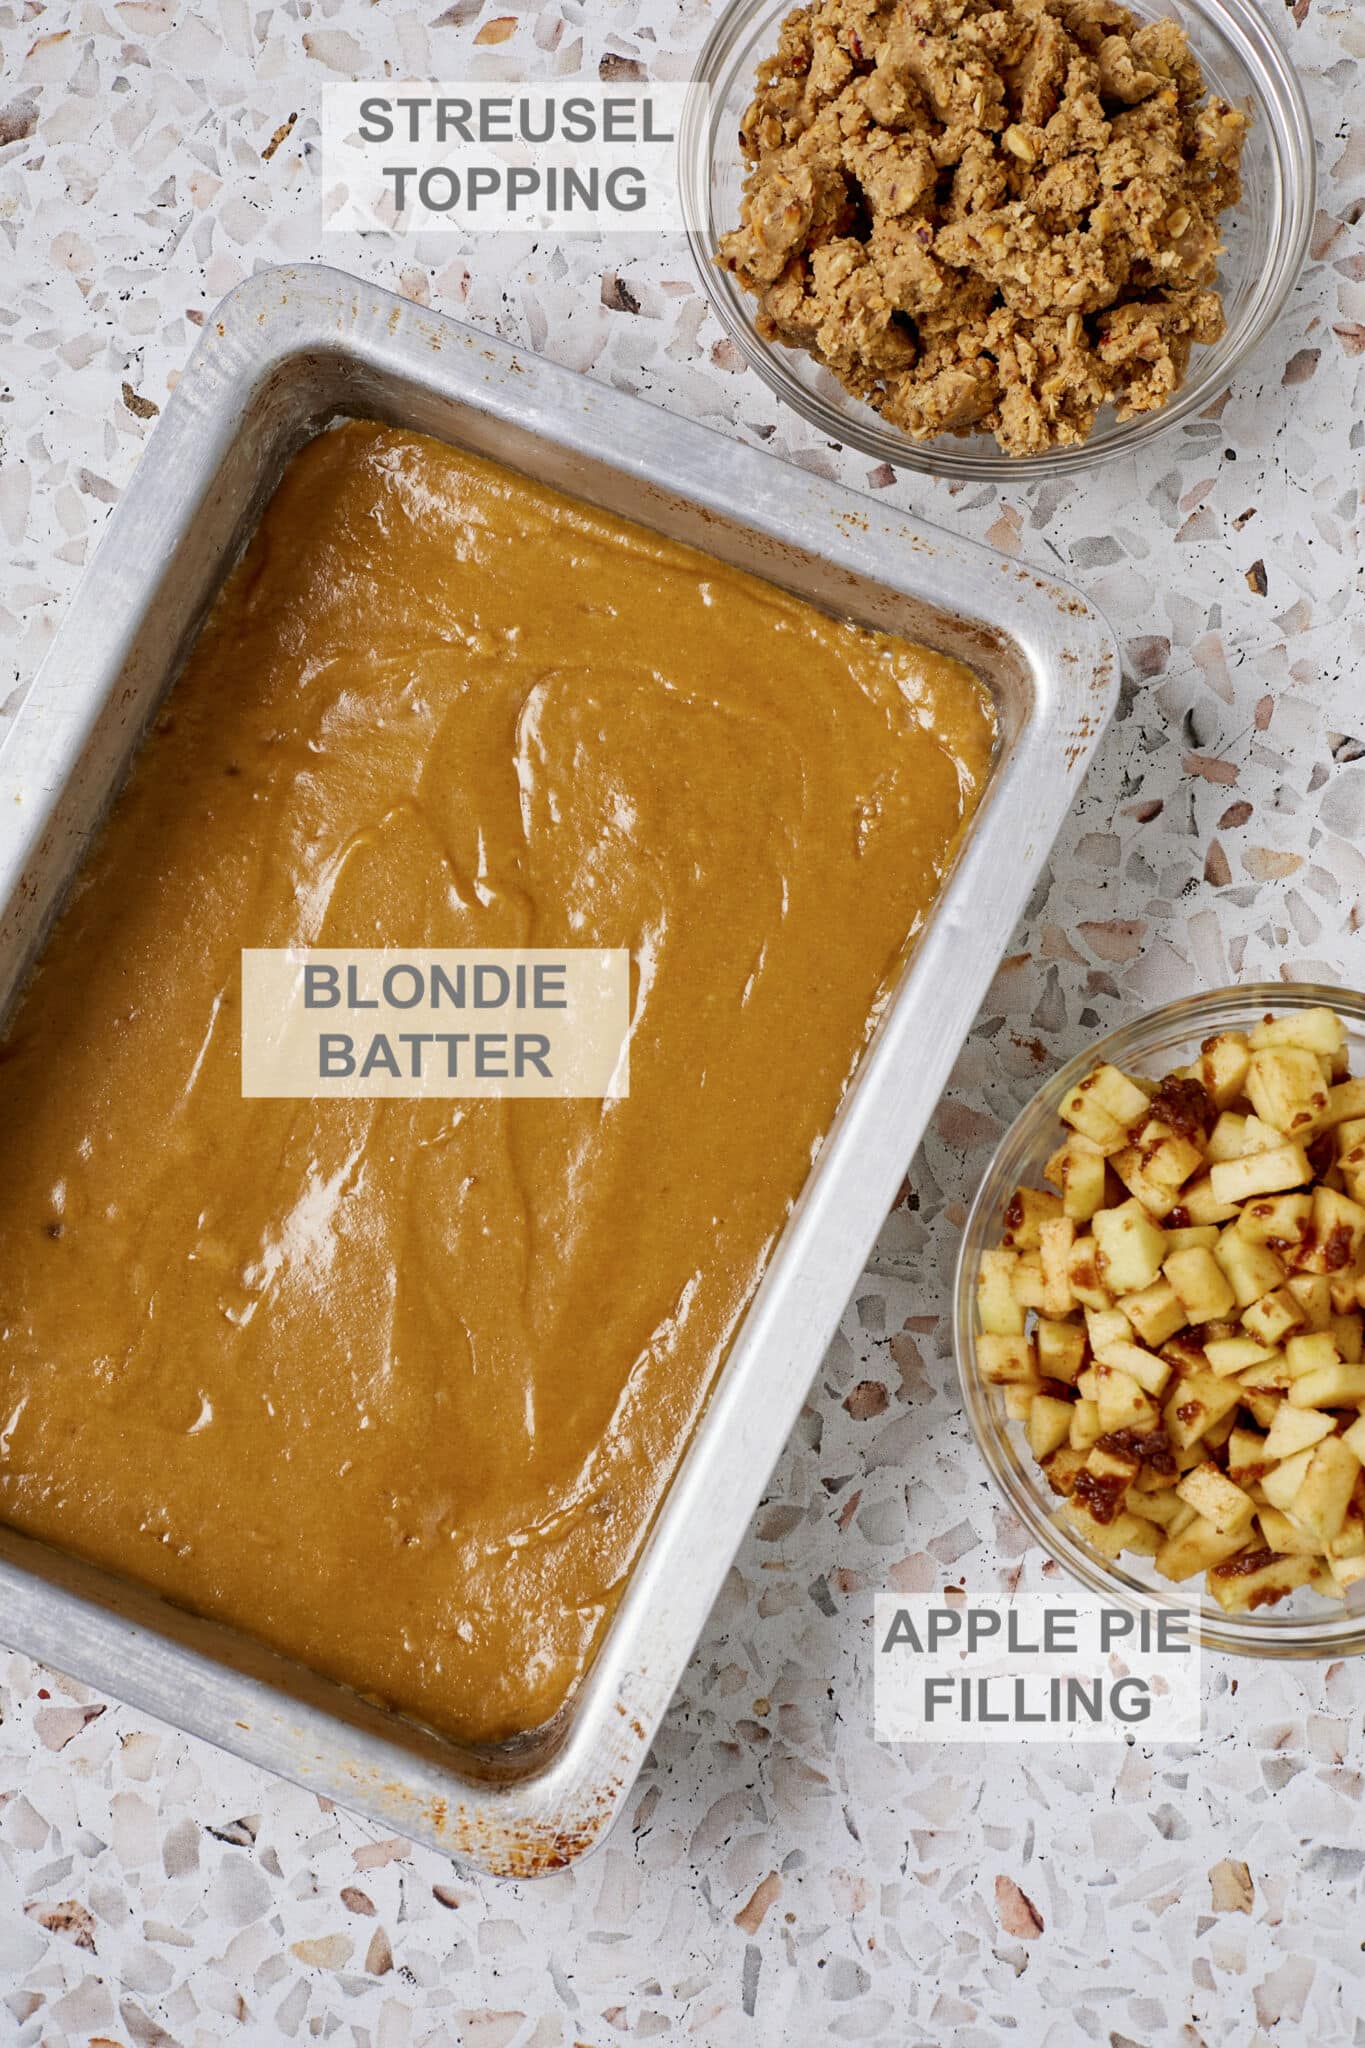 Key ingredients for Apple Pie Blondies include blondie batter in a metal baking tray, streusel topping in a glass bowl on the upper right side of the image, apple pie filling with chunks of apple and cinnamon sugar near the bottom right side of the image. 